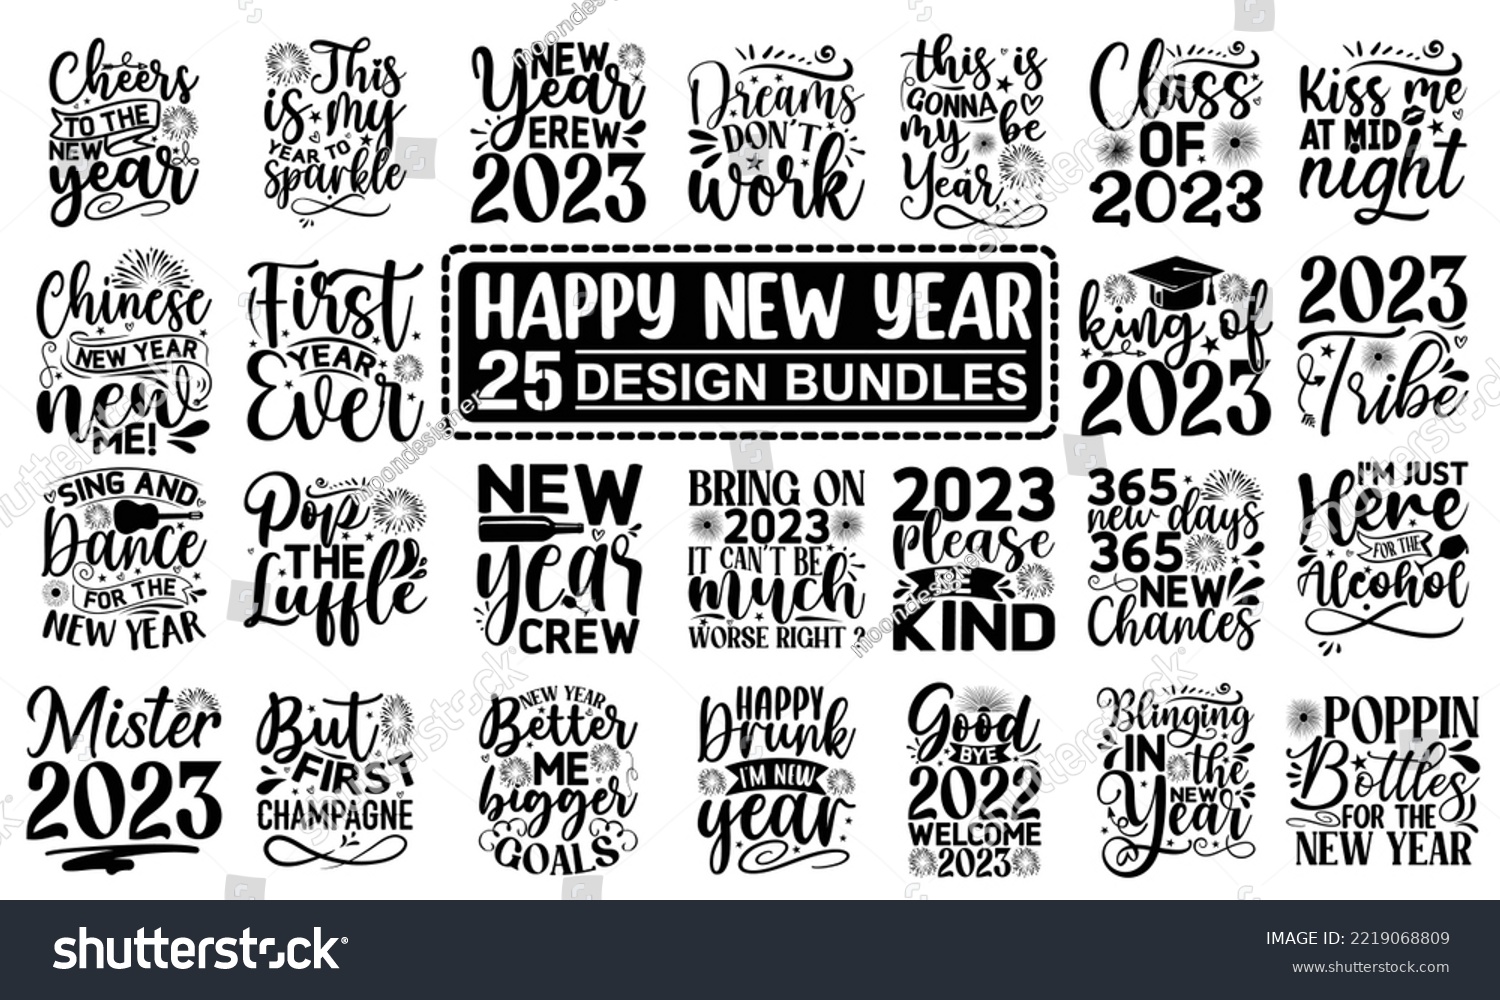 SVG of New year t shirt Designs bundle, Happy New Year SVG Cut Files Designs bundle svg